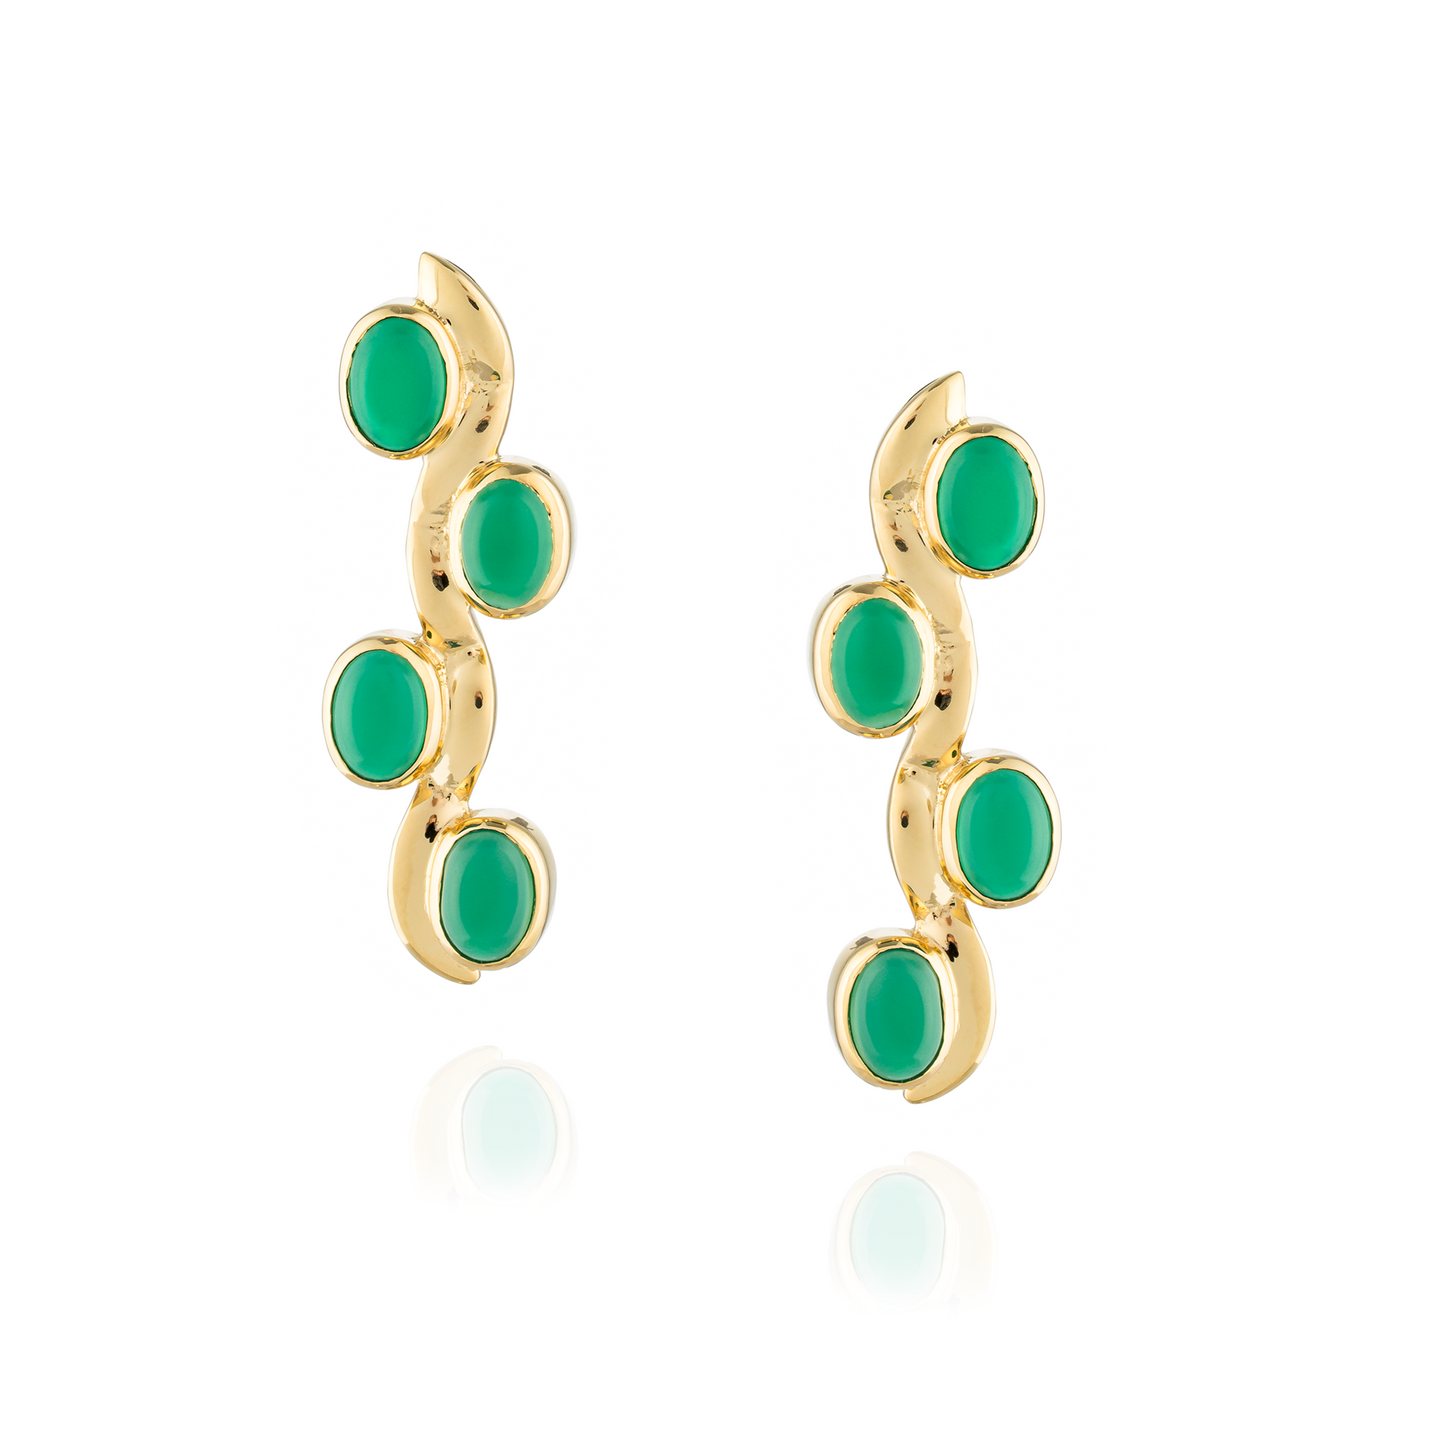 925 Silver Earrings plated in 18k Yellow Gold with 4 oval Green Onyx Cabouchon